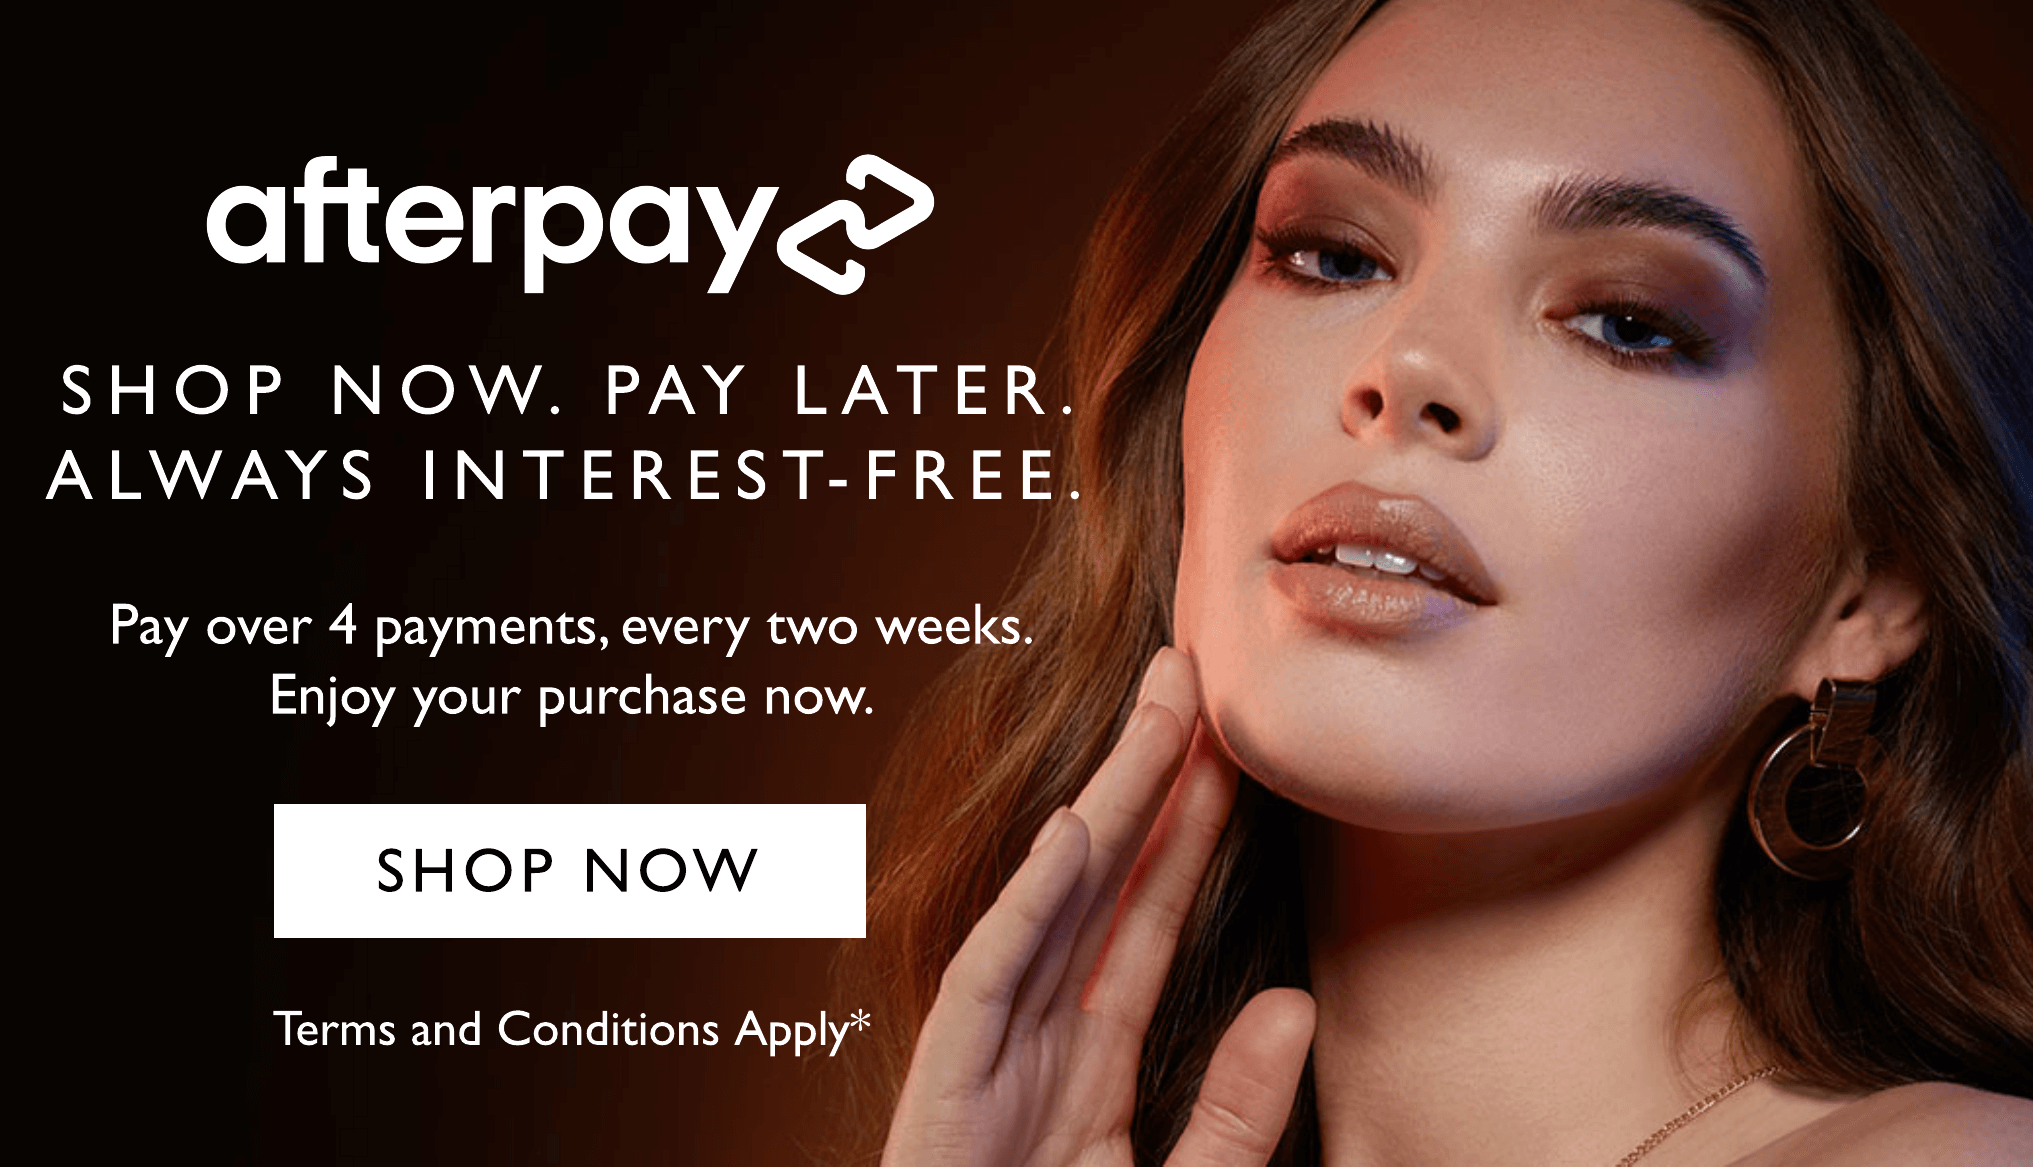 Afterpay, 4 easy payments